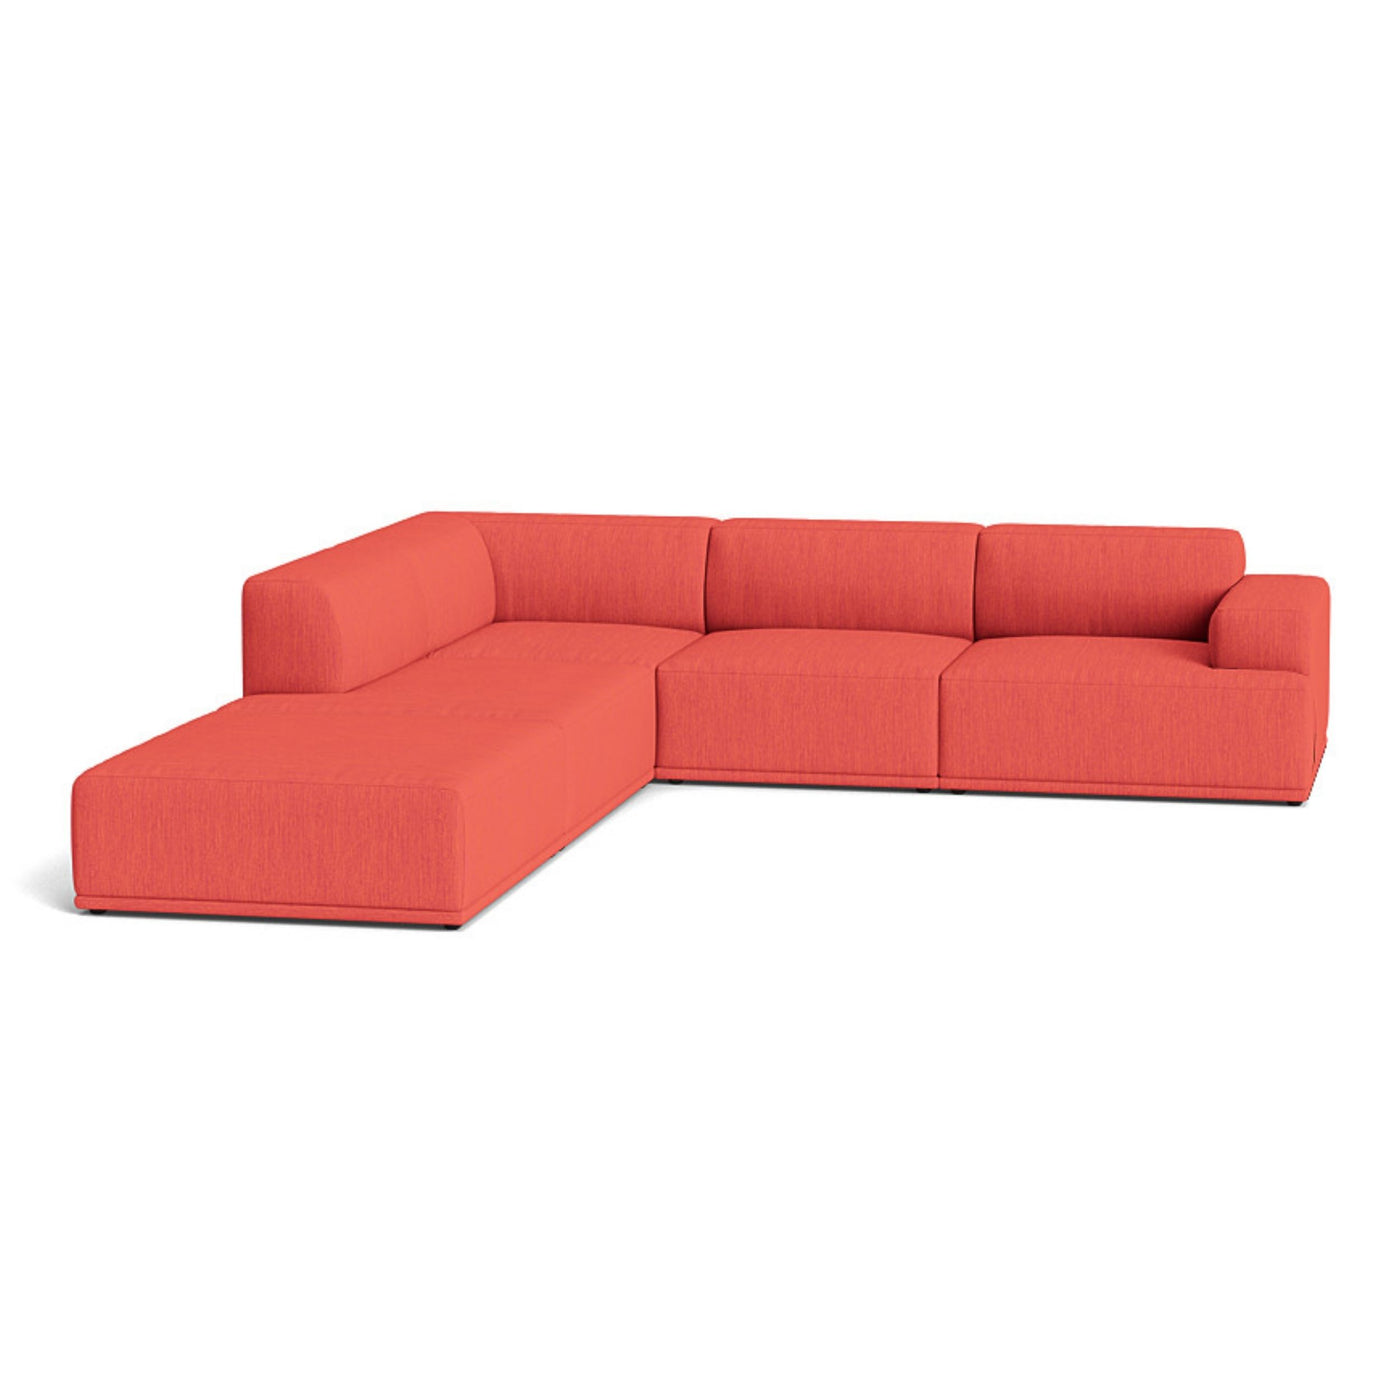 Muuto Connect Soft Modular Corner Sofa, configuration 1. Made-to-order from someday designs. #colour_balder-562